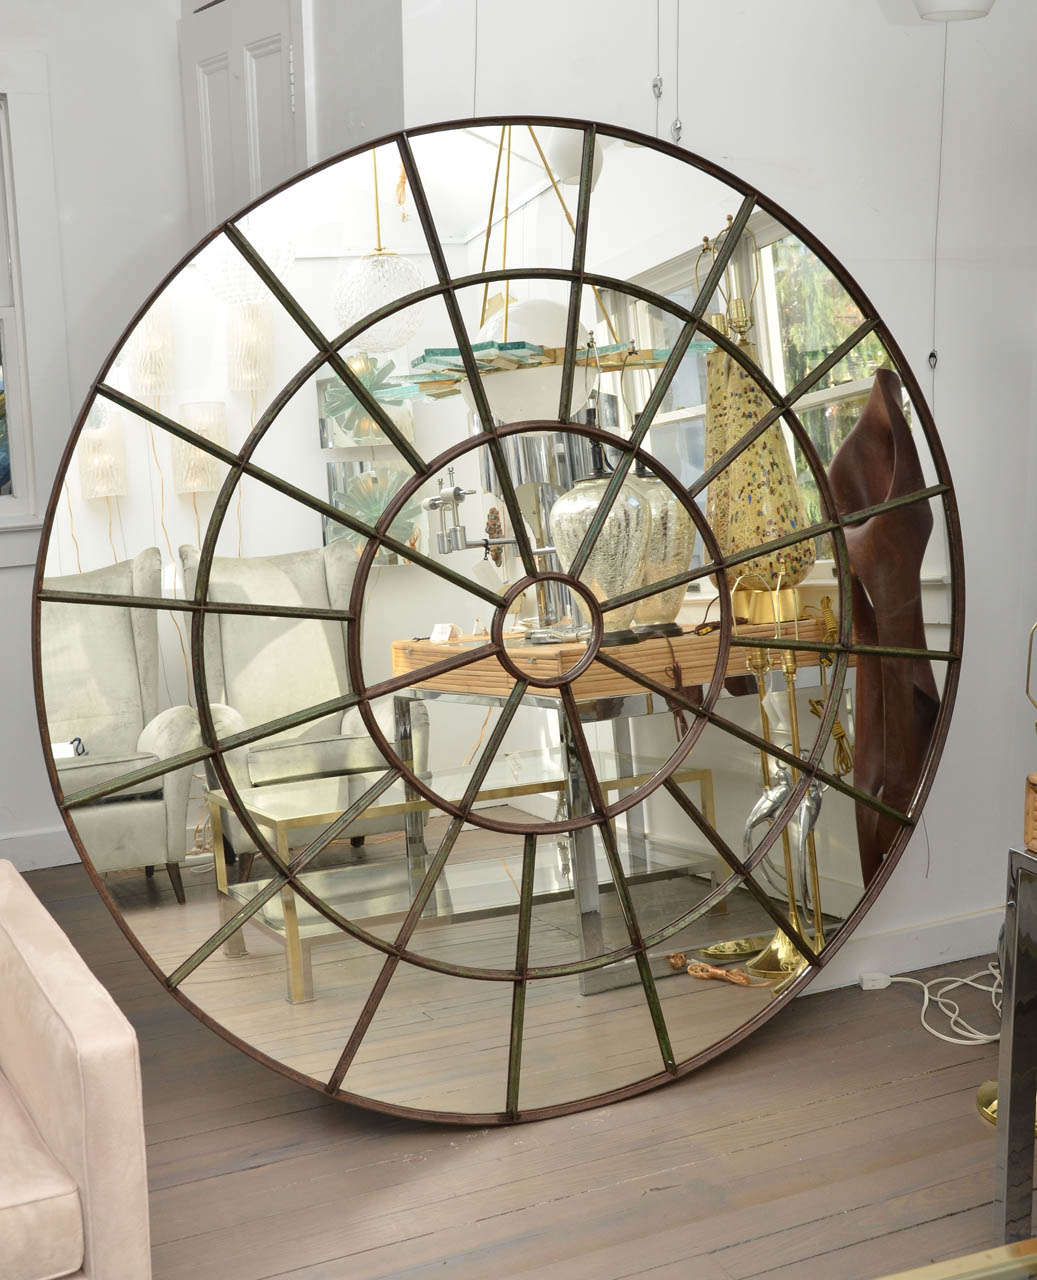 Architectural mirrored conservatory circular window from France, circa 1920s.